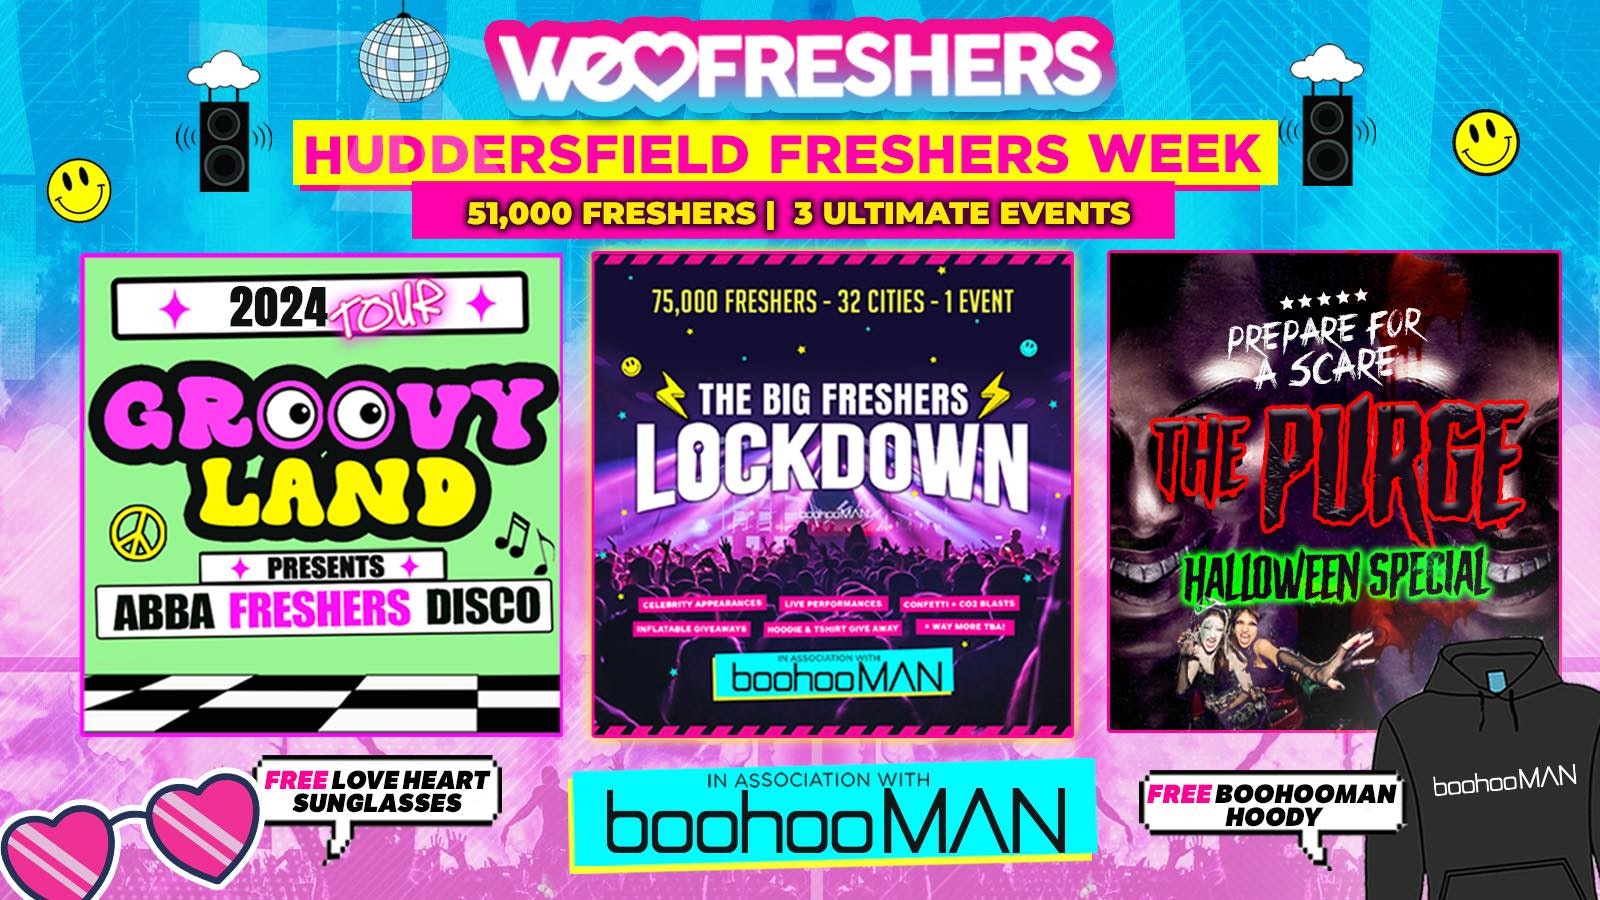 WE LOVE HUDDERSFIELD FRESHERS 2024 in association with boohooMAN – 3 EVENTS❗